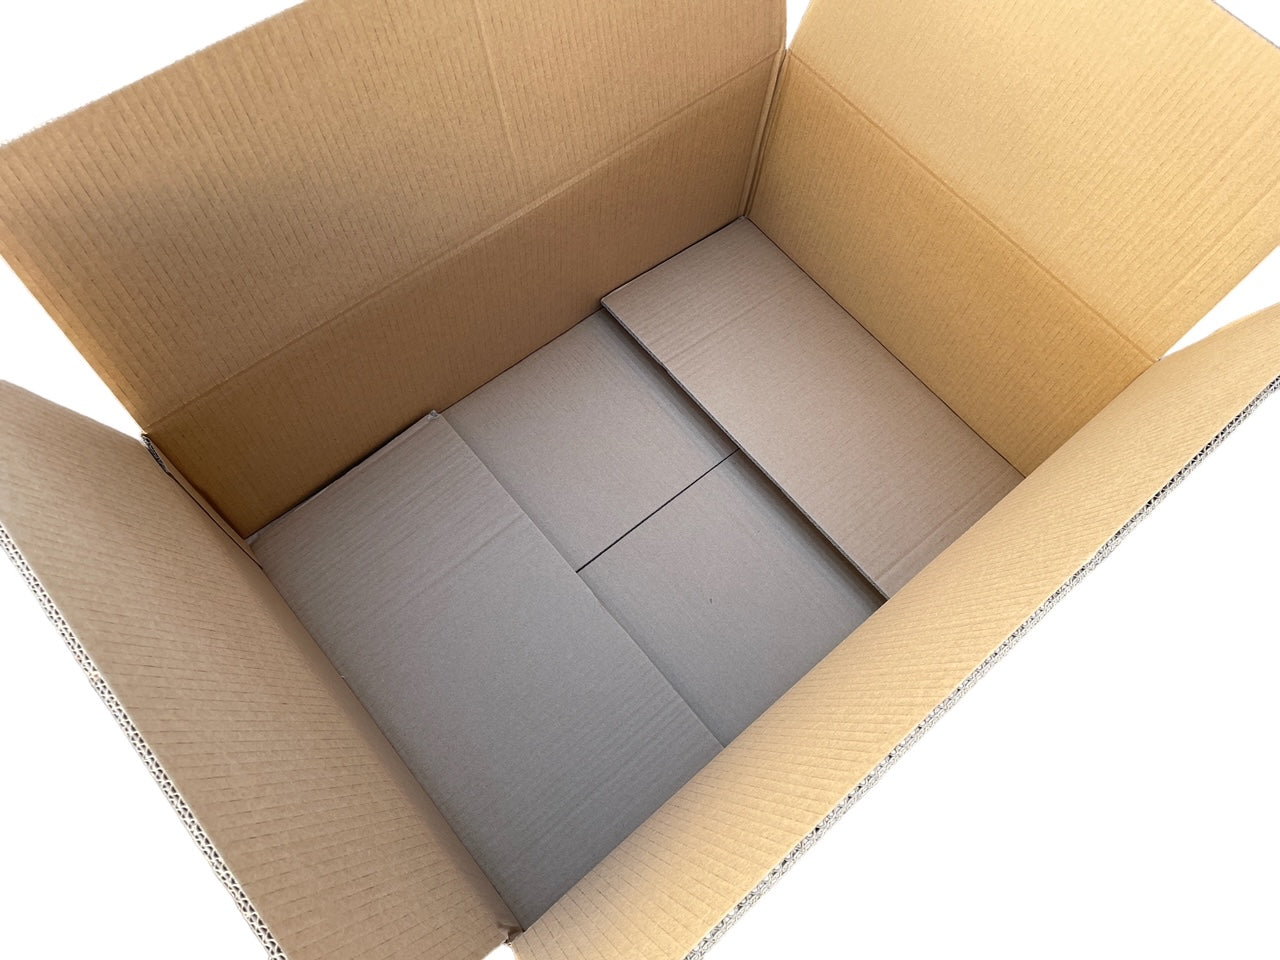 Large Packing Boxes, Boxes and Packaging